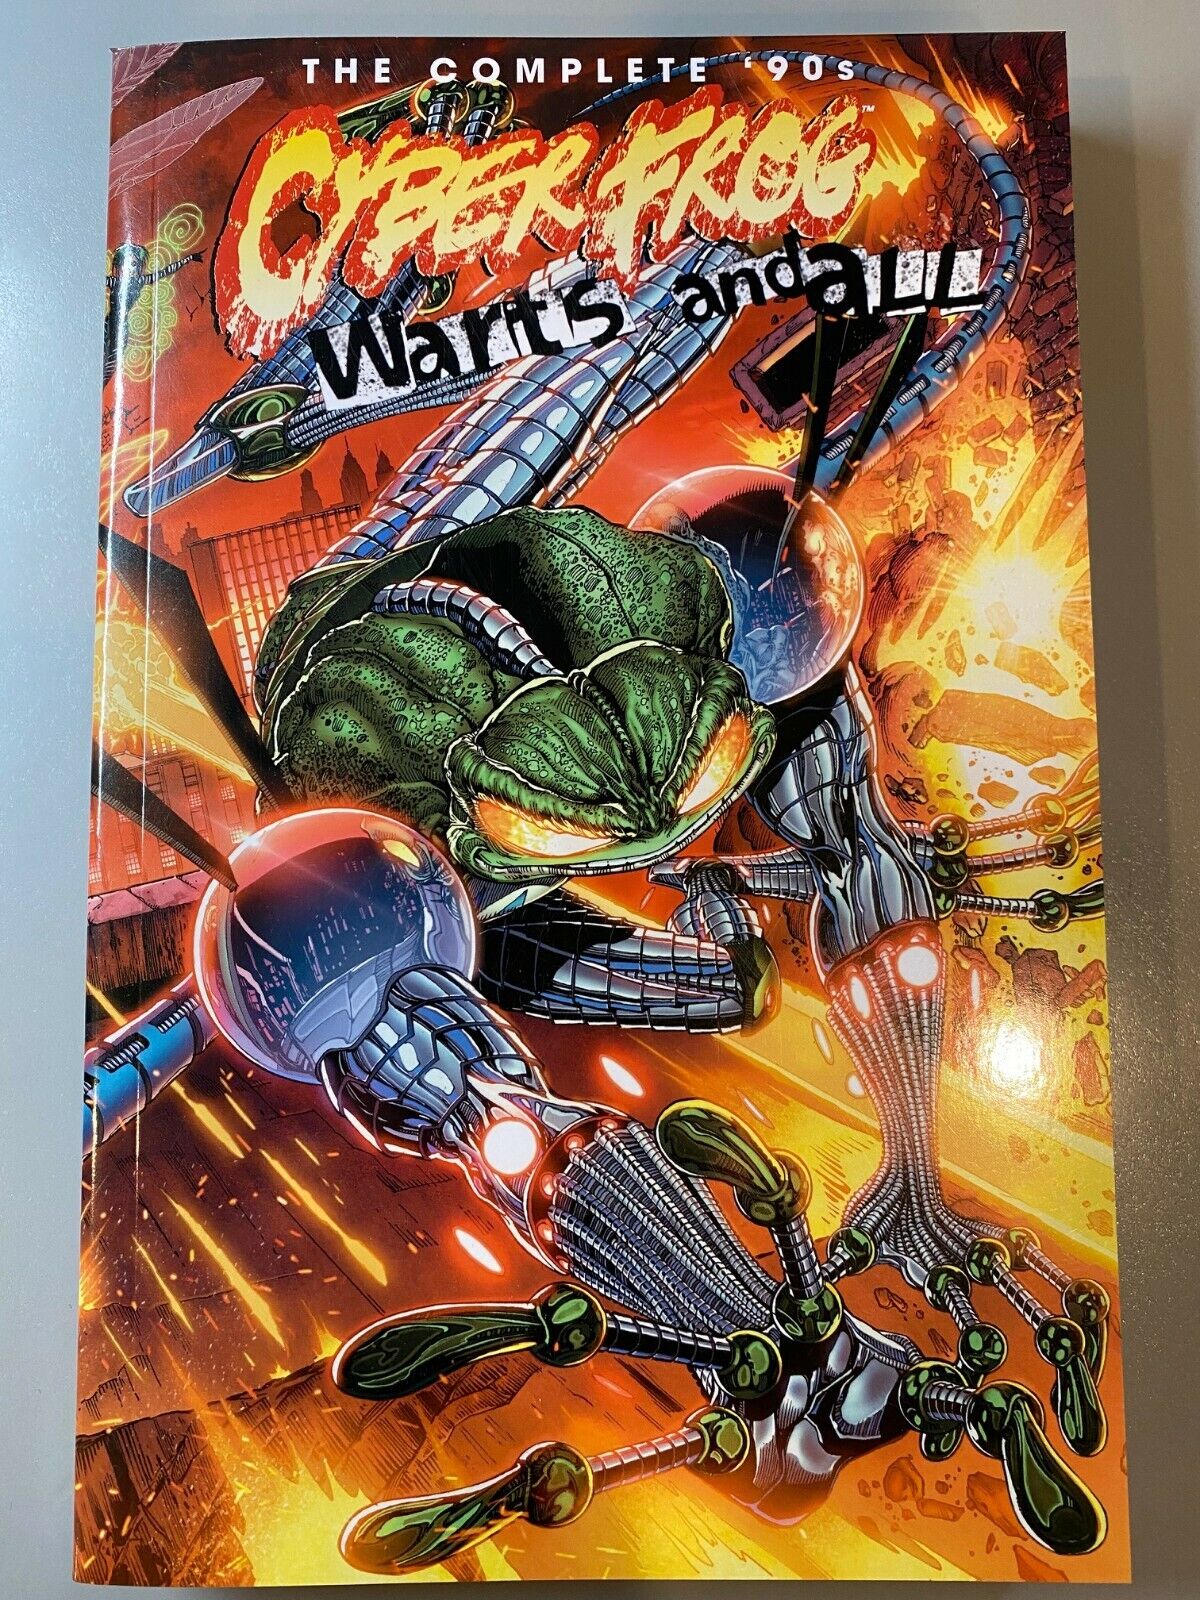 The Complete '90s CYBERFROG: WARTS AND ALL TPB Softcover collection